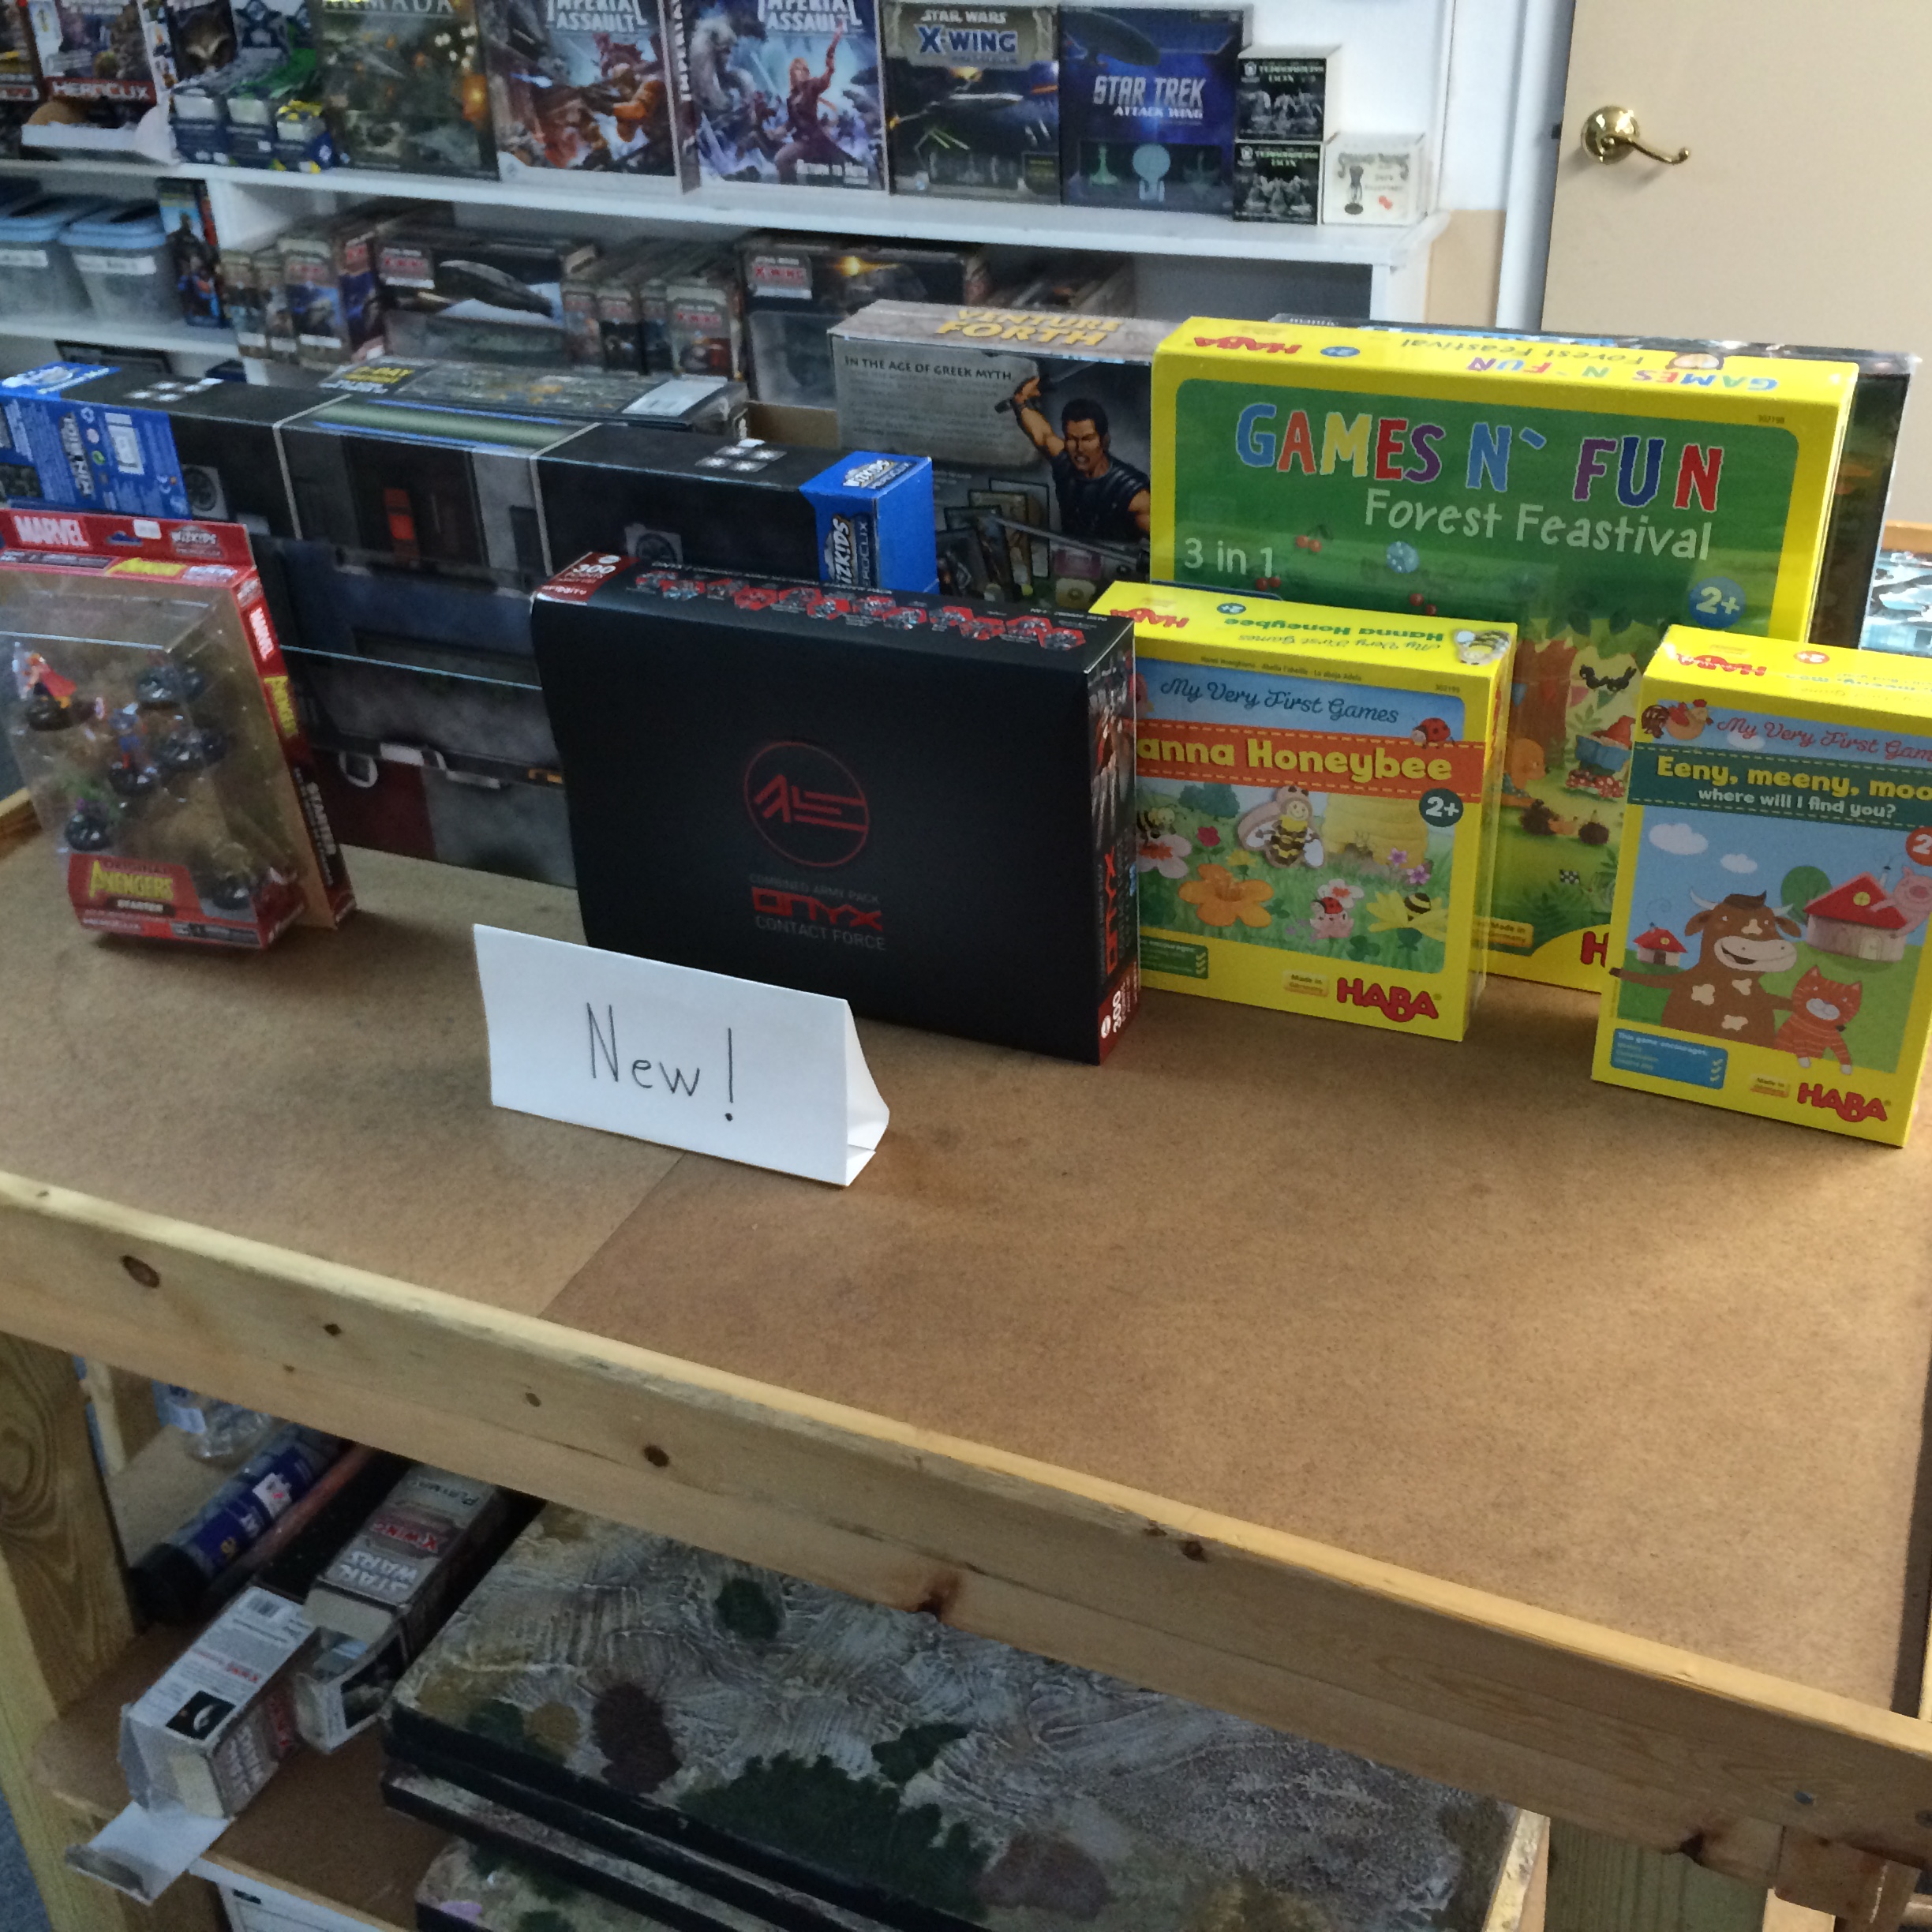 Combined Army Onyx Contact Force, Heroclix Premium Maps, and New HABA Children’s Games!